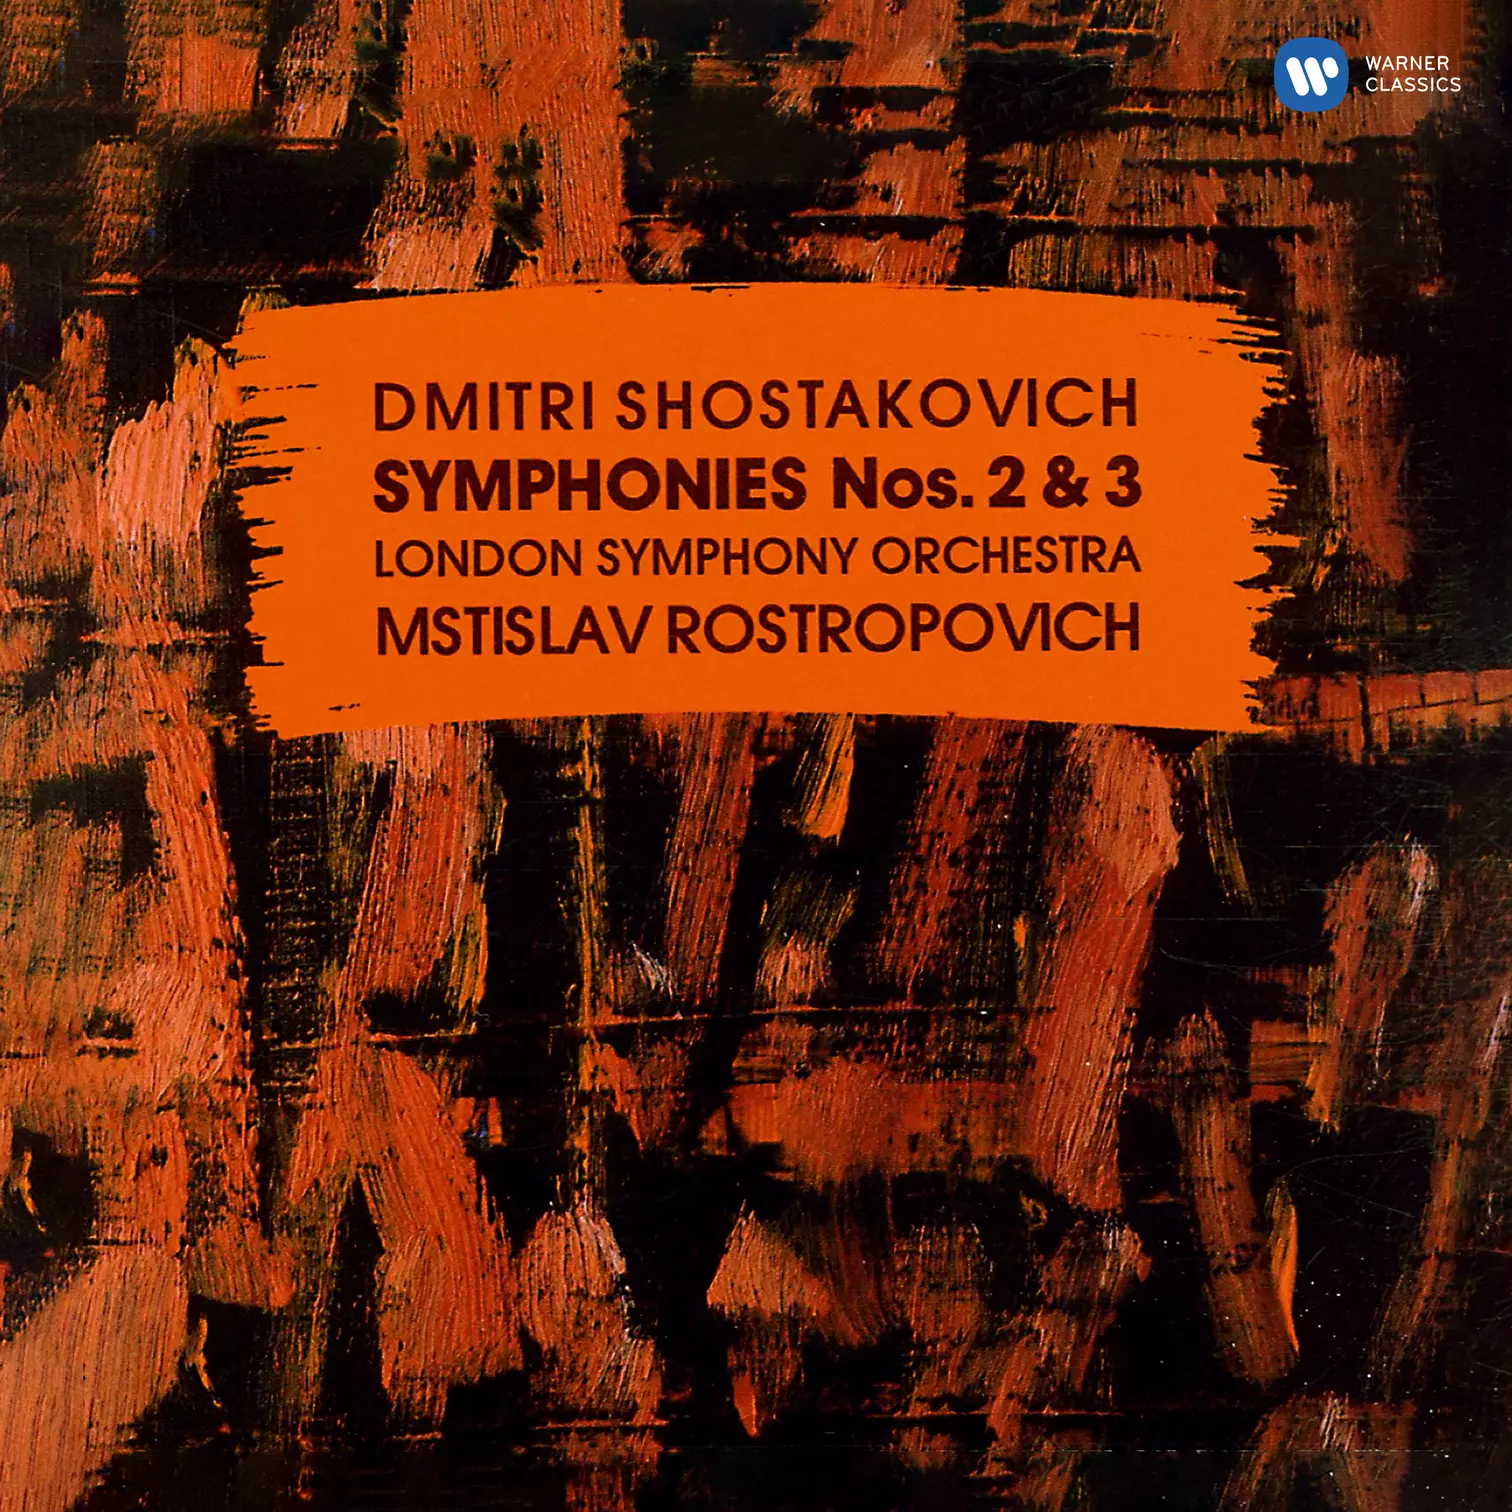 Shostakovich: Symphonies Nos. 2, "To October" & 3, "First of May"